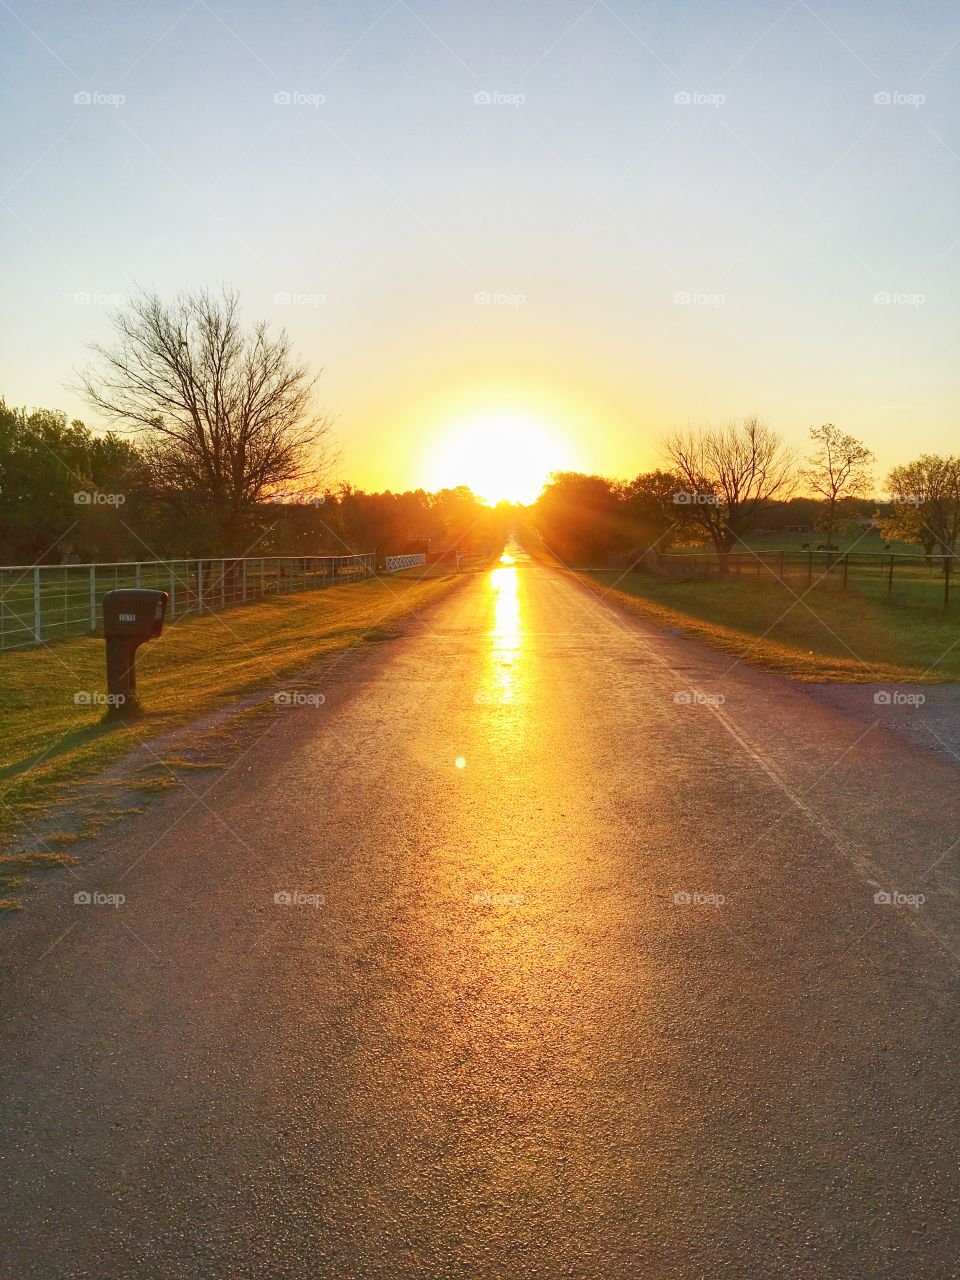 Sunrise on a country road. 